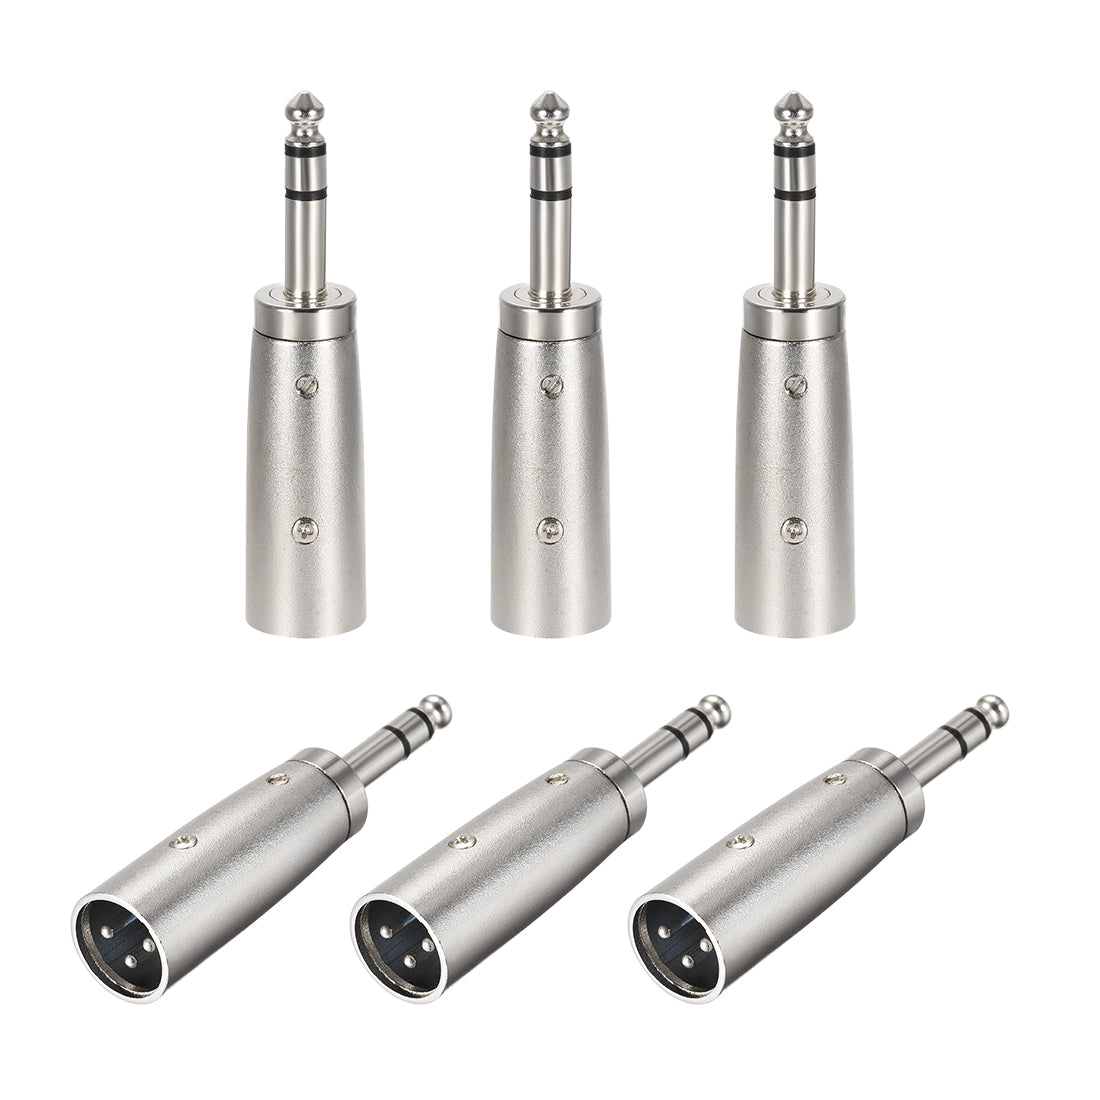 uxcell Uxcell XLR Male to 1/4" Male TRS Adapter,Gender Changer - XLR-M to 6.35mm Balanced Coupler Adapters,Balanced Plug In Audio Connector,Mic Male Plug 6pcs